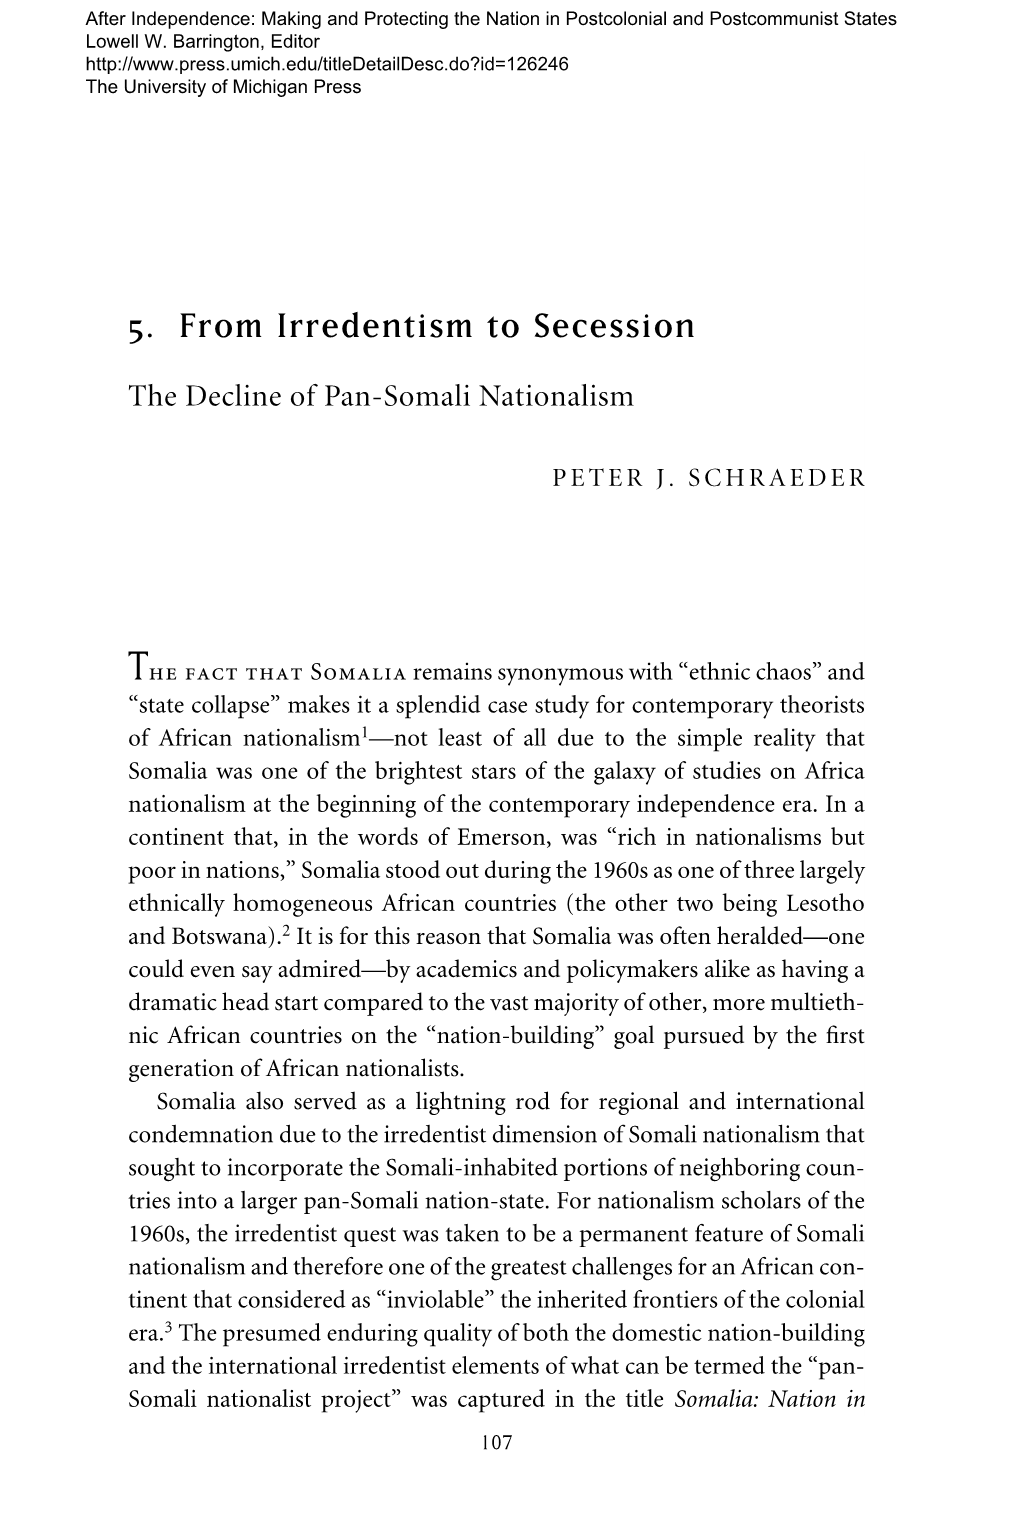 5. from Irredentism to Secession